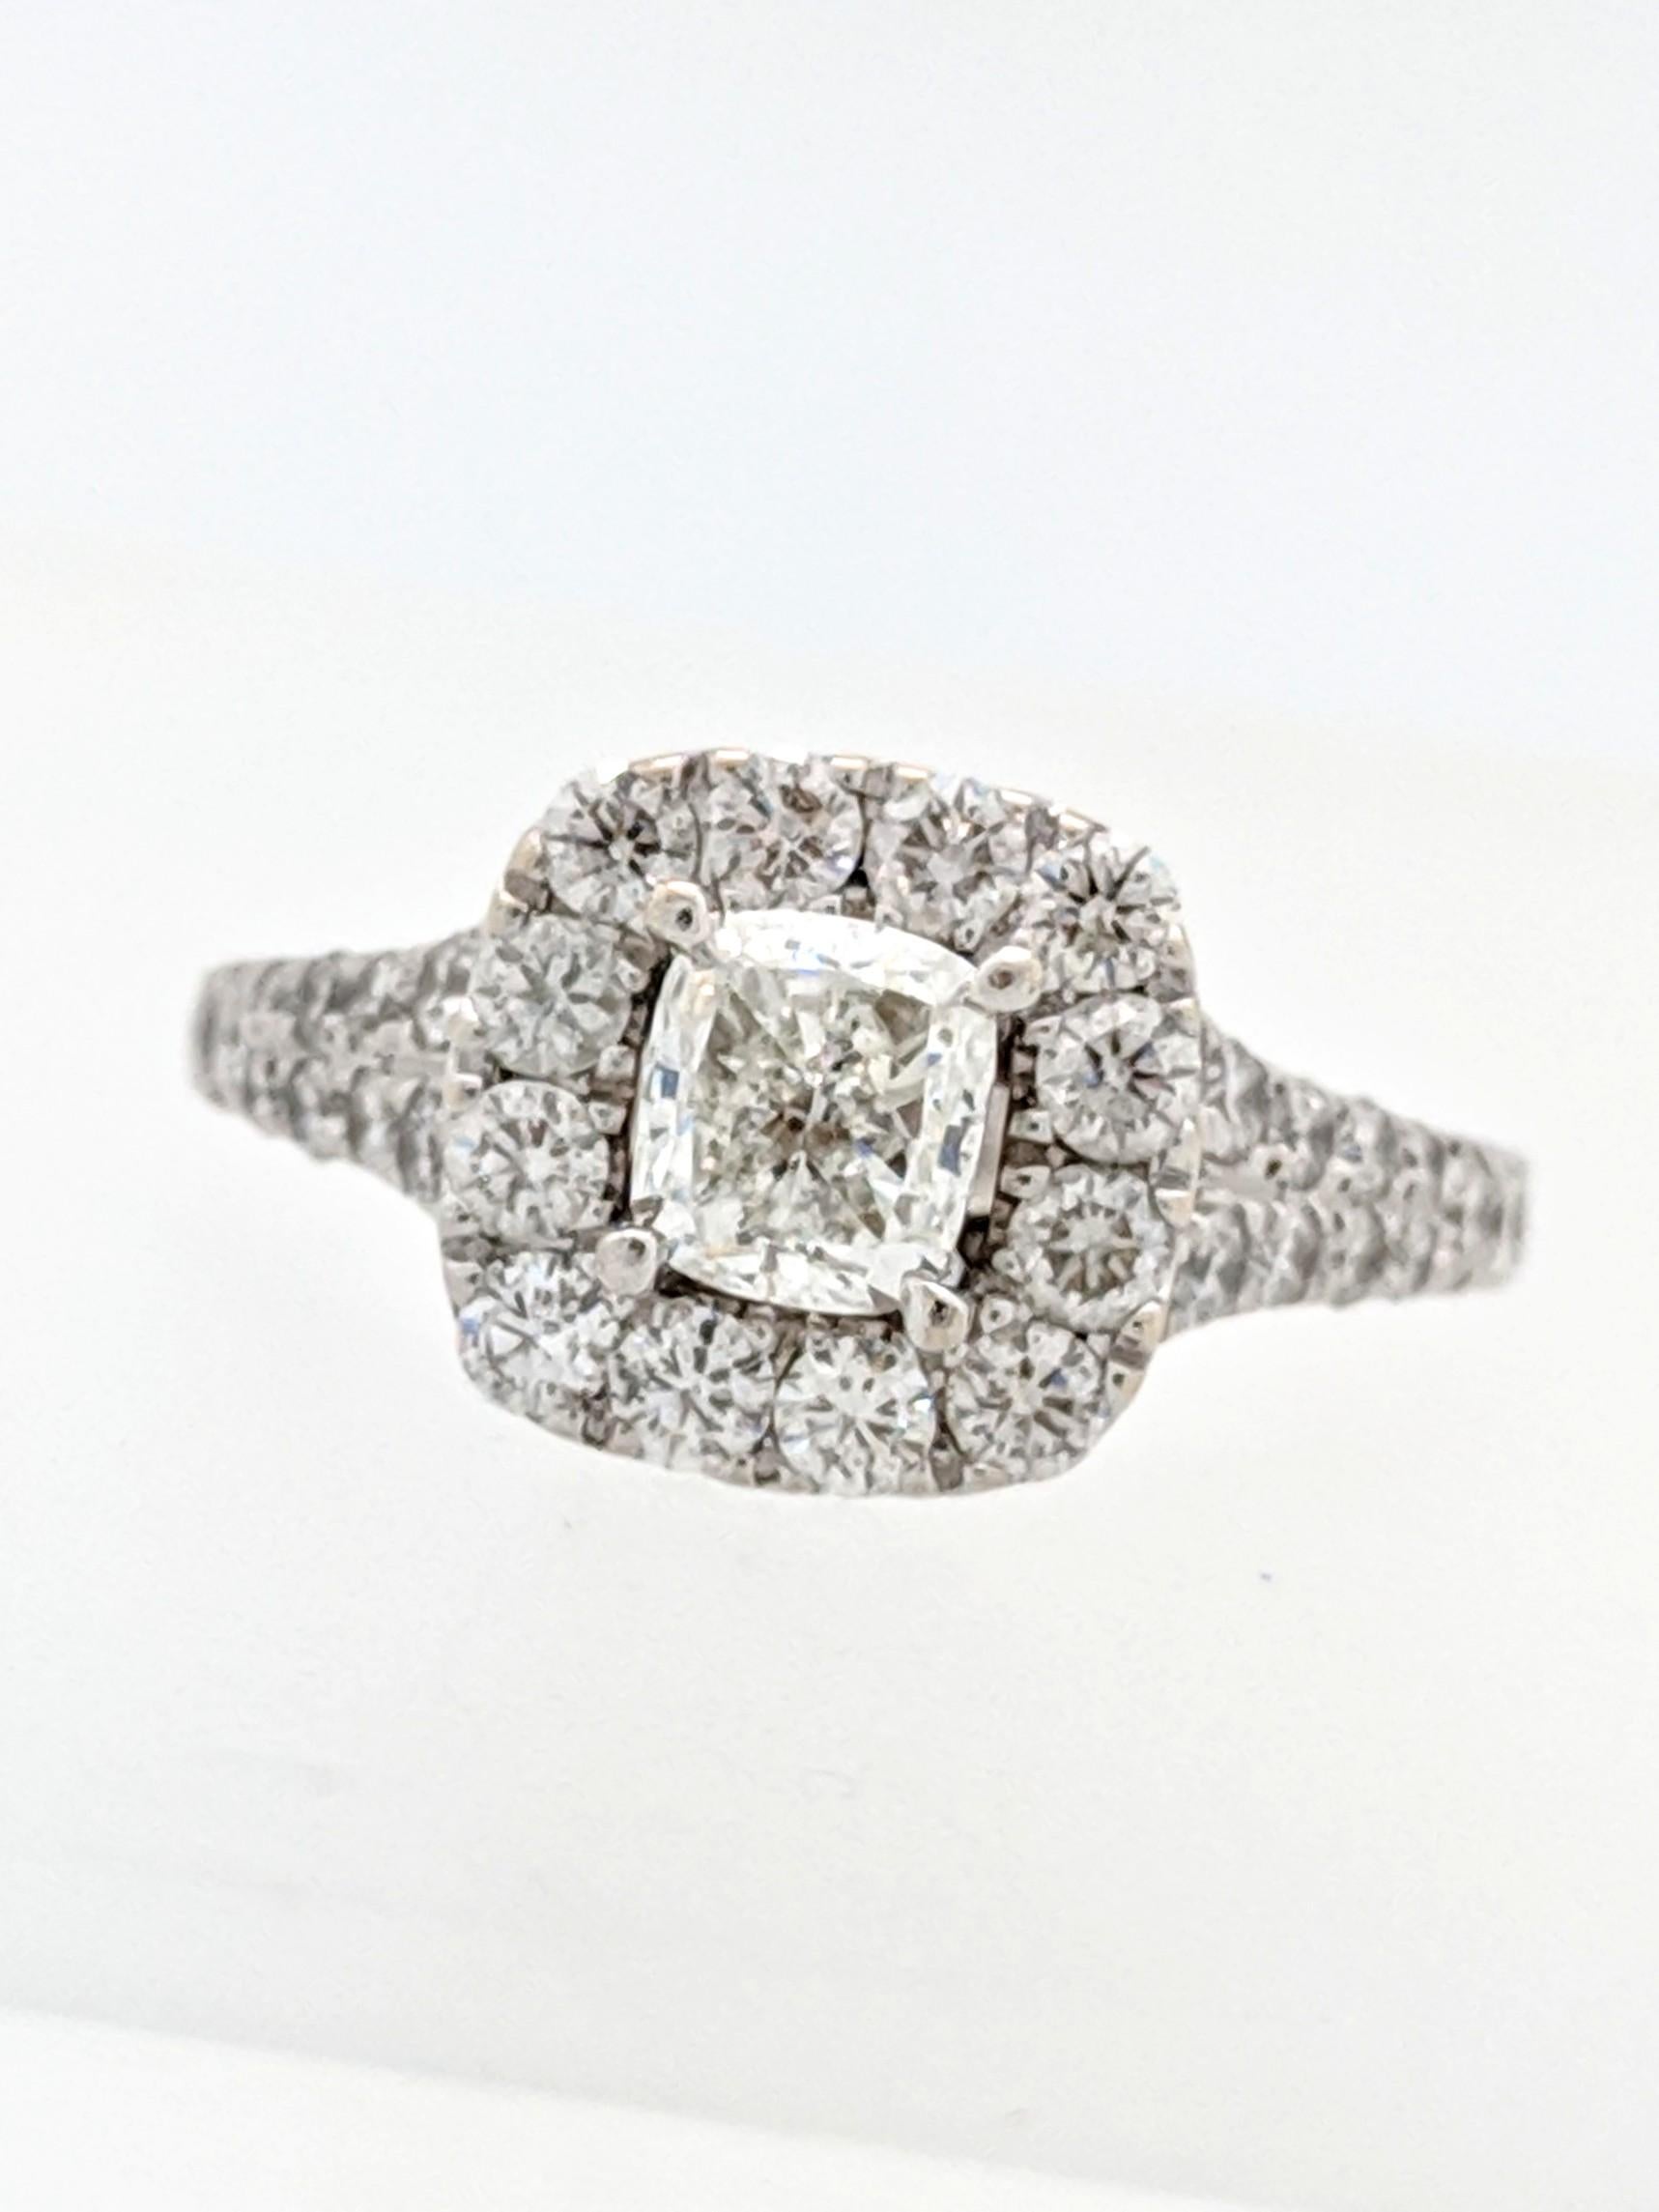 Neil Lane Cushion Halo Engagement Ring 2-1/6ct tw Diamonds Set in 14K White Gold

You are viewing a 1ct natural cushion cut diamond. We estimate the diamond to be I1 in clarity and I color.

The center stone is beautifully displayed in a Neil Lane